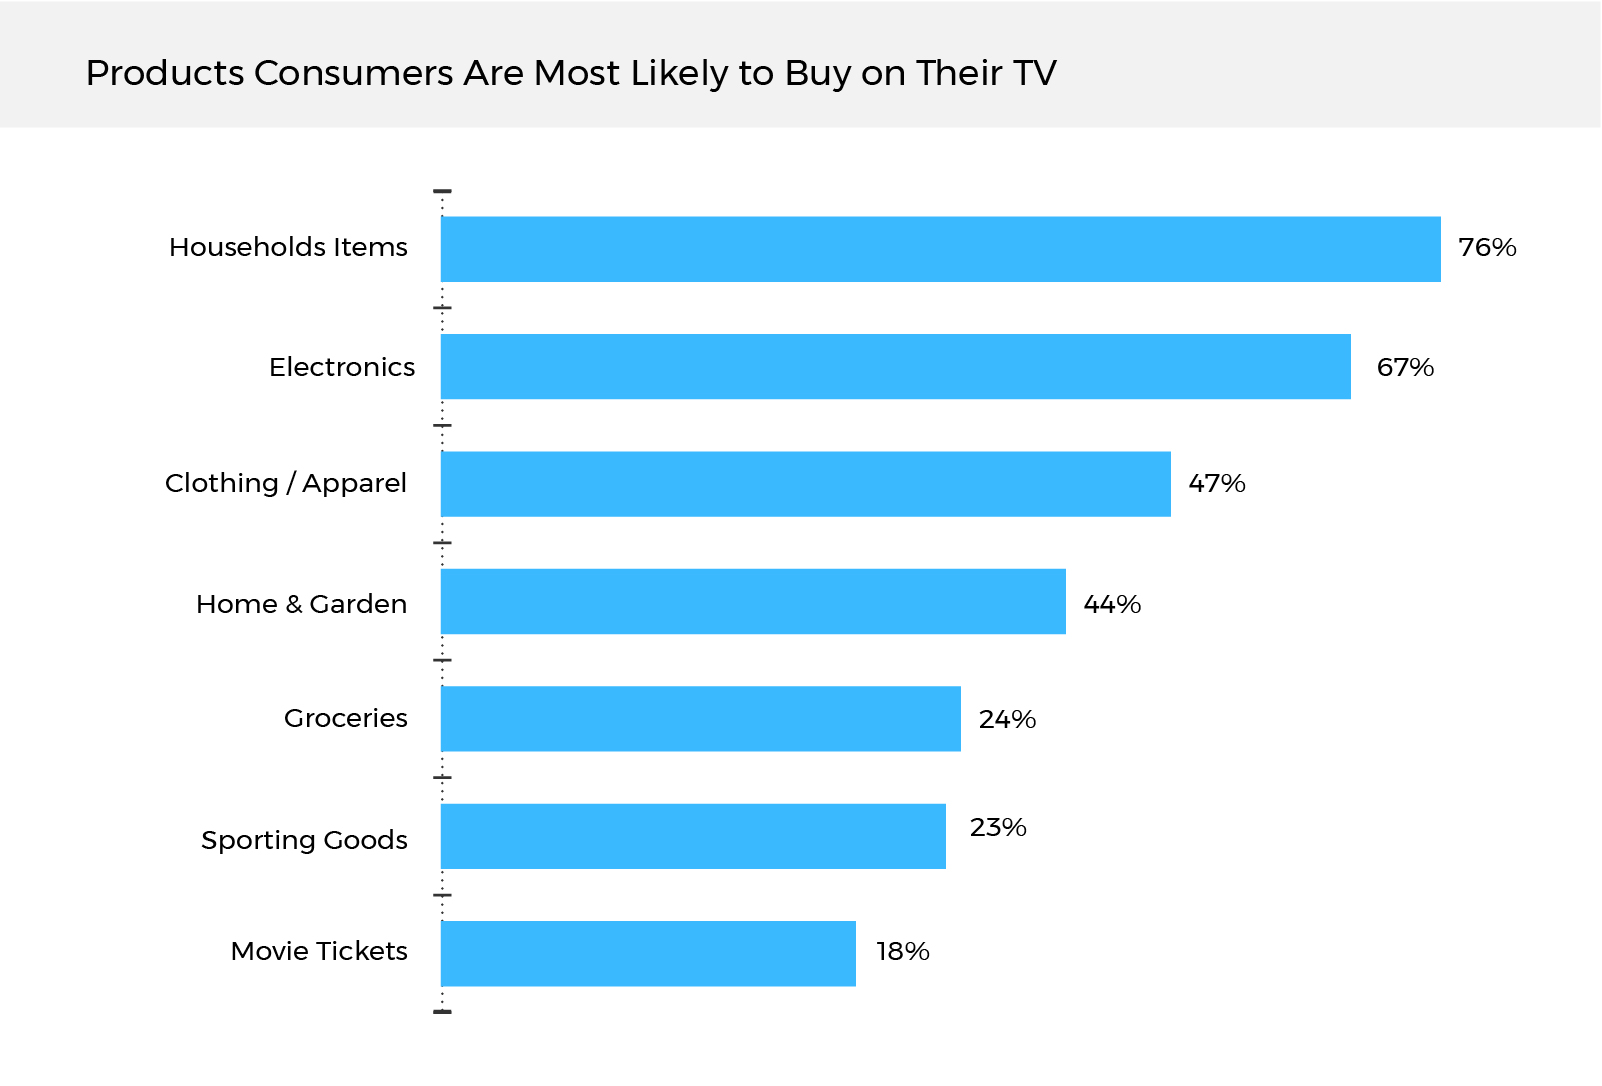 Chart 2 - Products Consumers Are Most Likely to Buy on Their TV